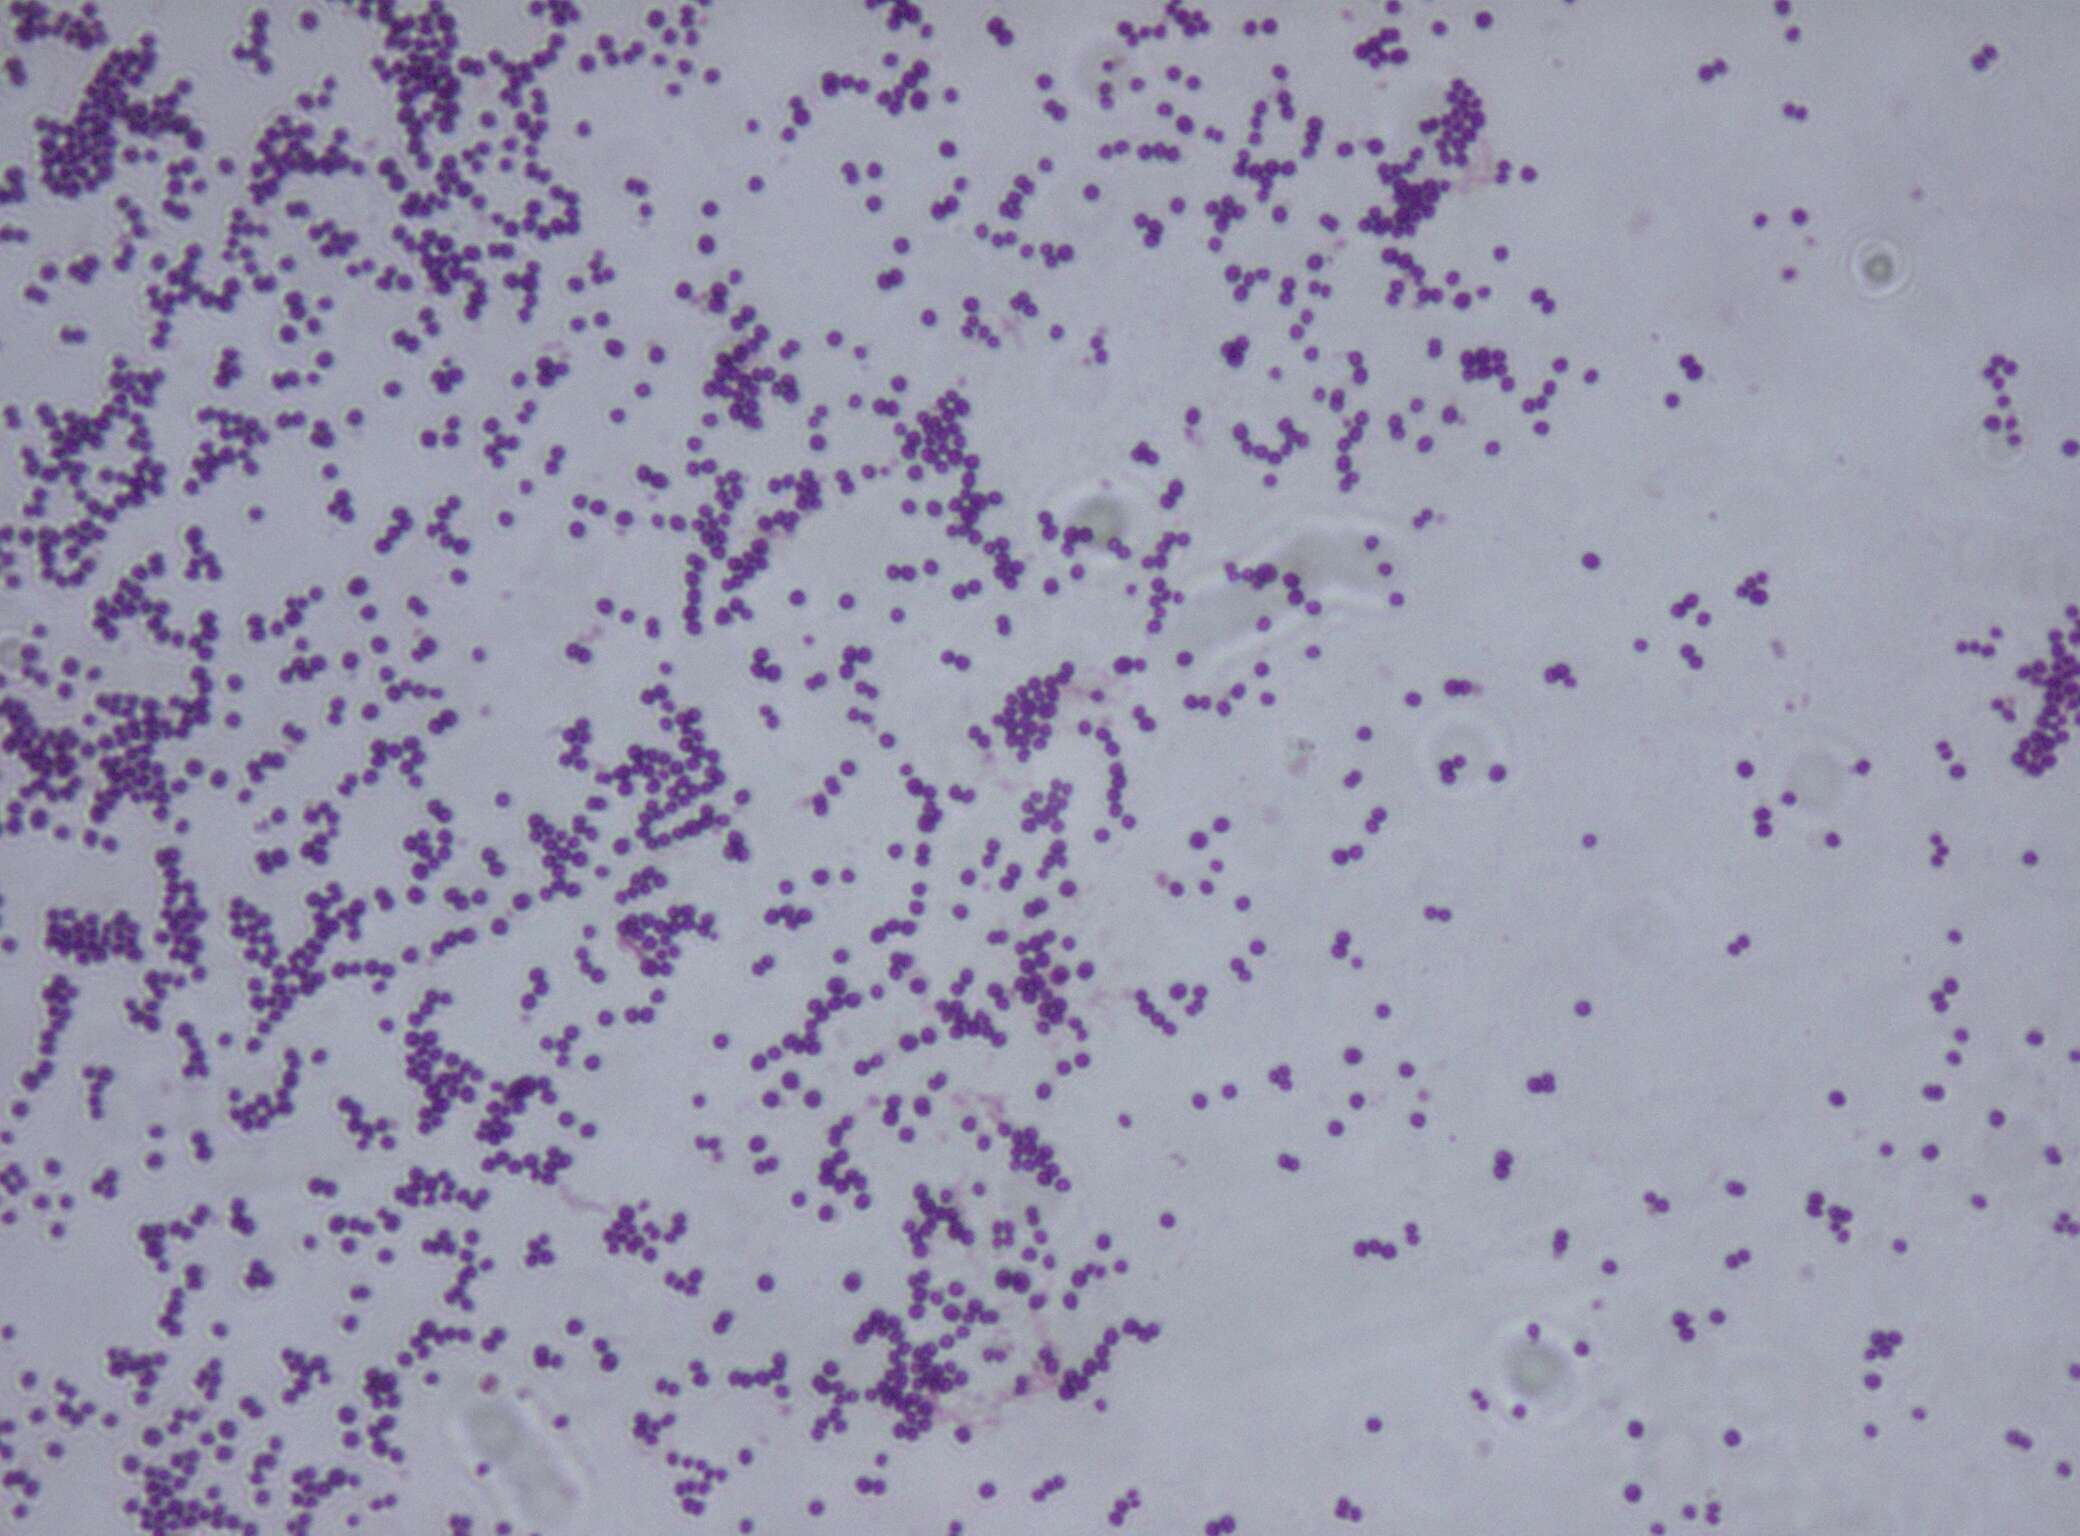 Image of Staphylococcus saprophyticus